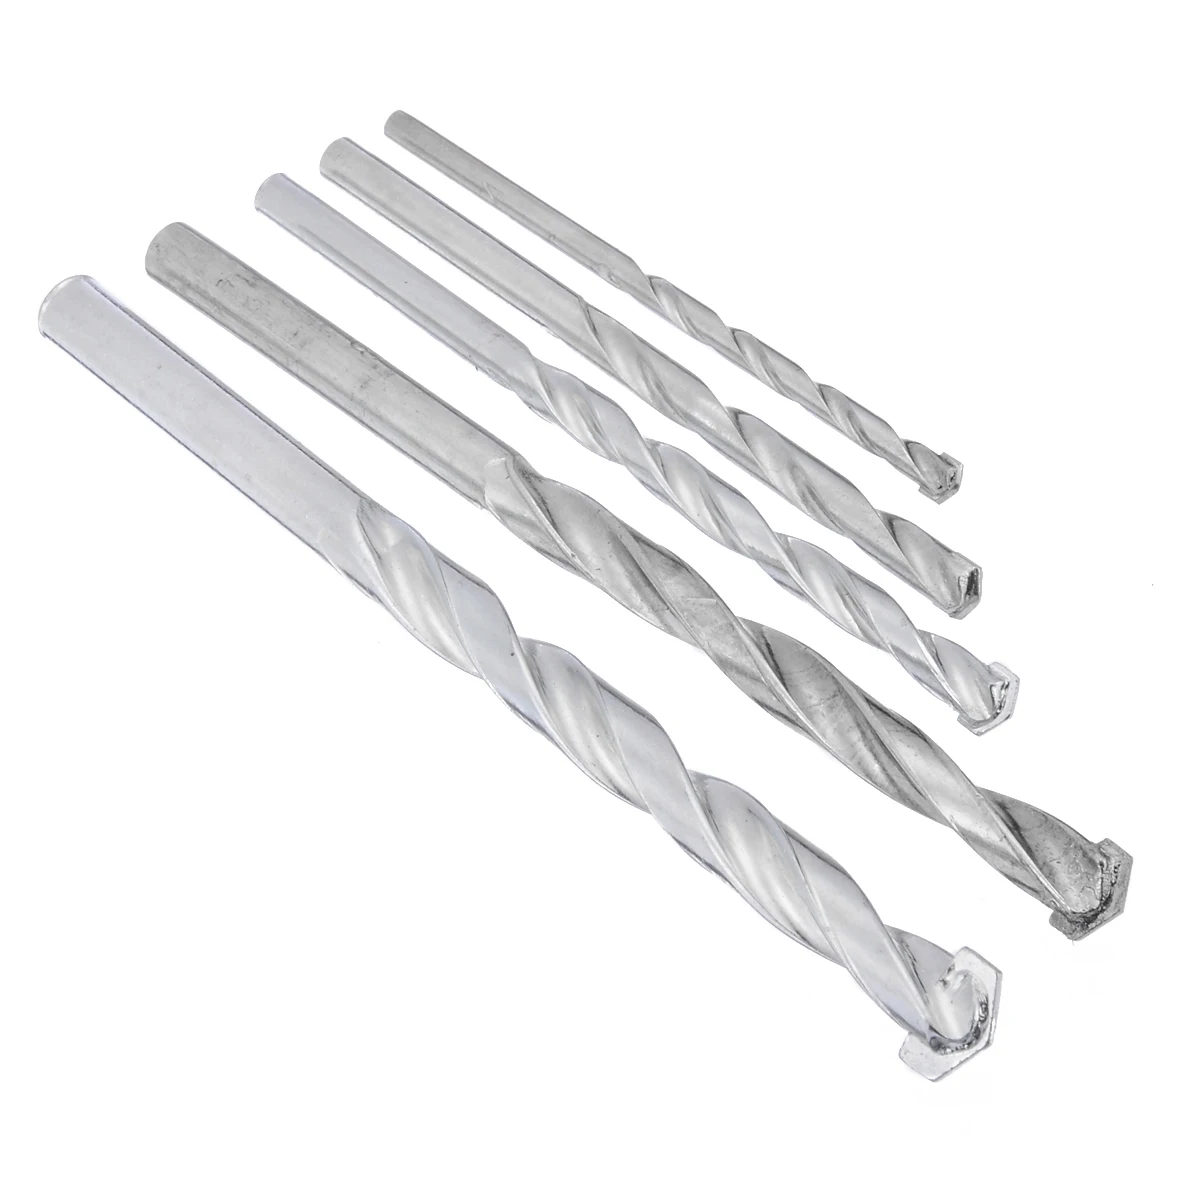 

5Pcs Masonry Drills Bit Carbide Tipped Concrete Brick Tile & Stone Drilling Set 4/5/6/8/10mm For Electric Drill Power Tools